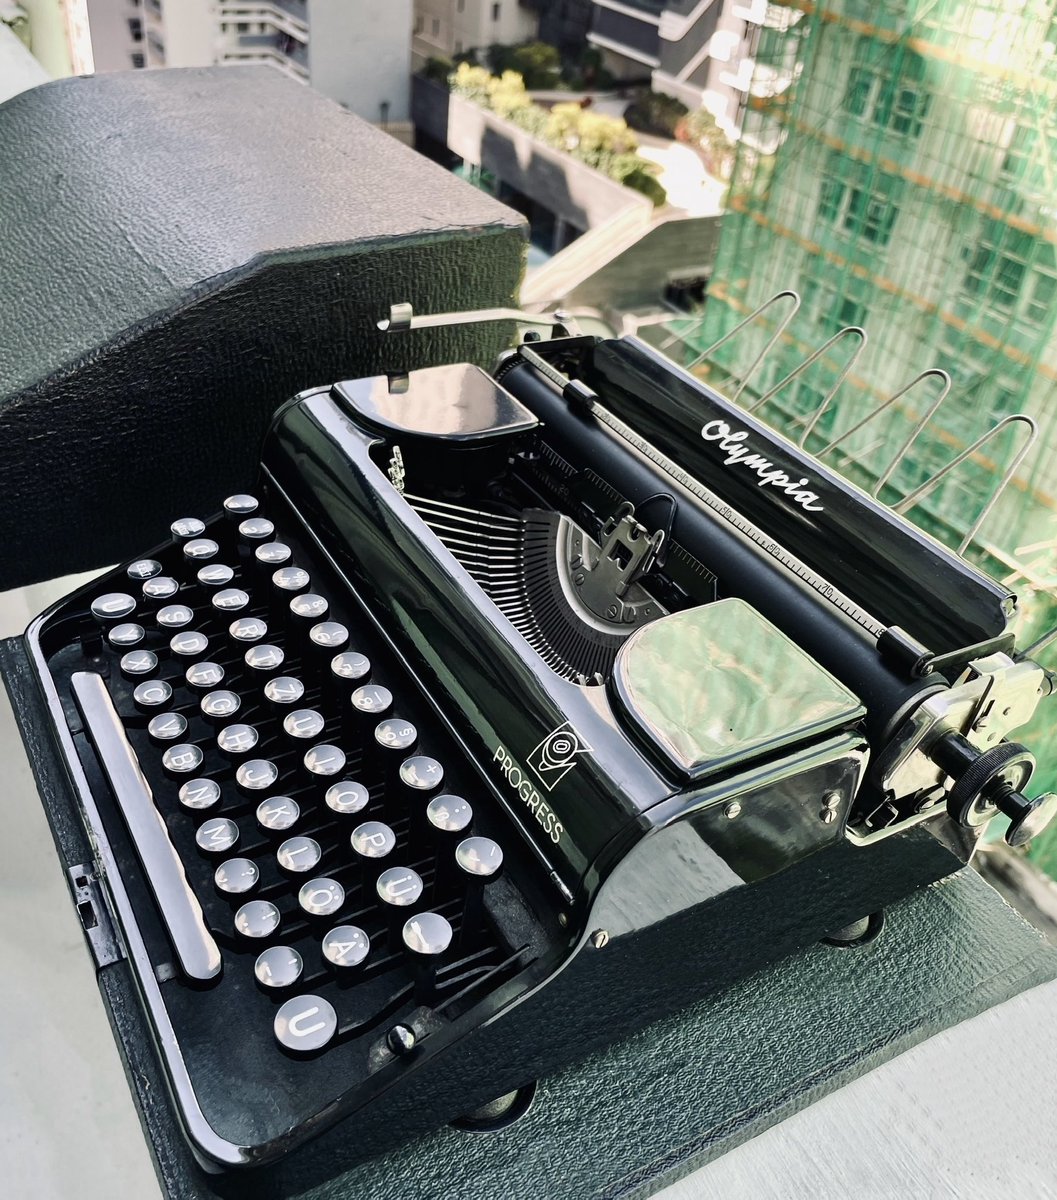 This Olympia Progress was made at the Olympia -Werke Wilhelmshaven factory in 1947. Even after decades of storage this lovely portable typewriter required no replacement parts; following a quick clean and adding fresh ribbons the Progress was as good as new  :-)